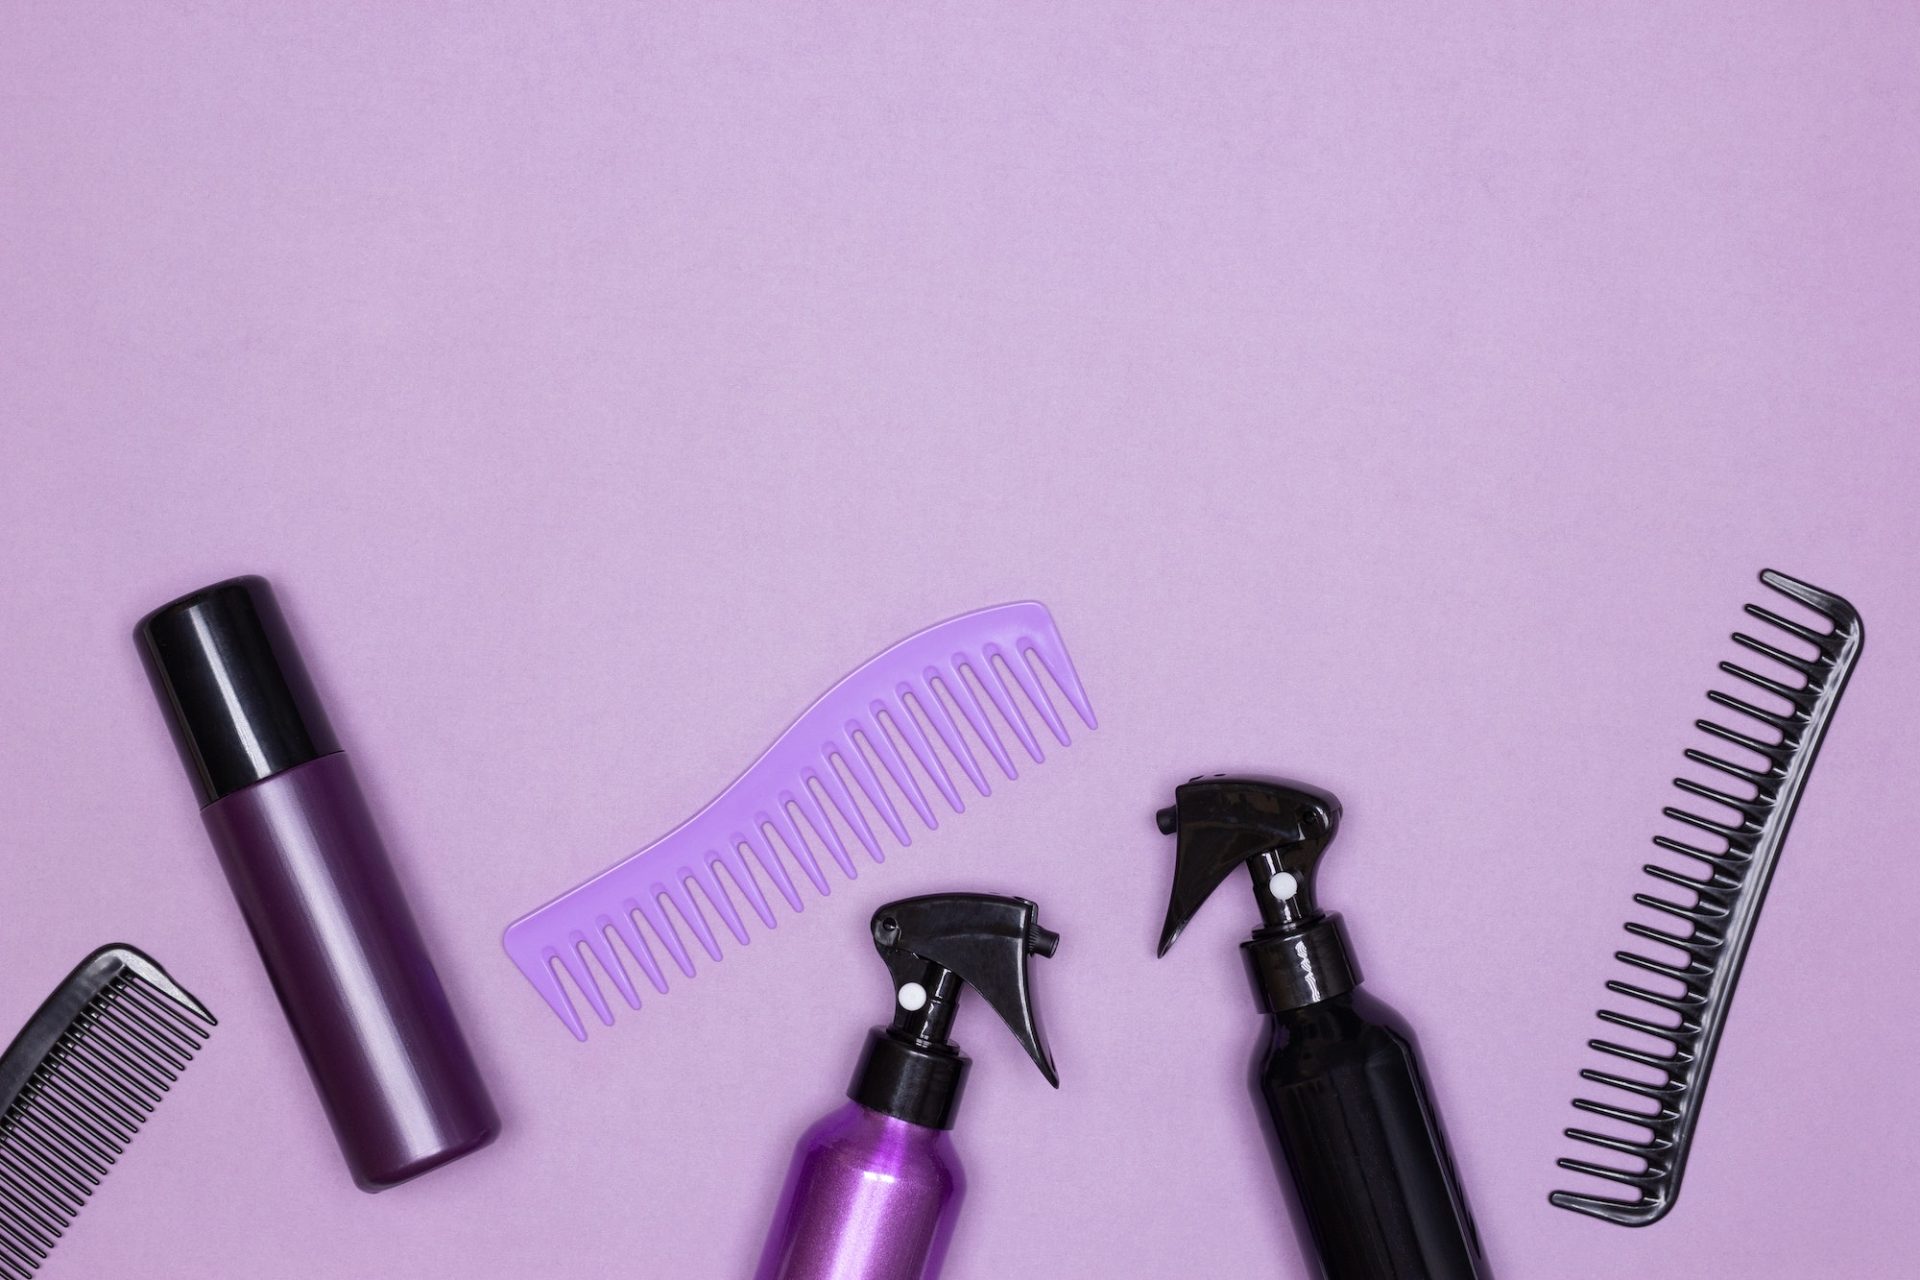 Hair styling products with combs top view on purple background. Copy space